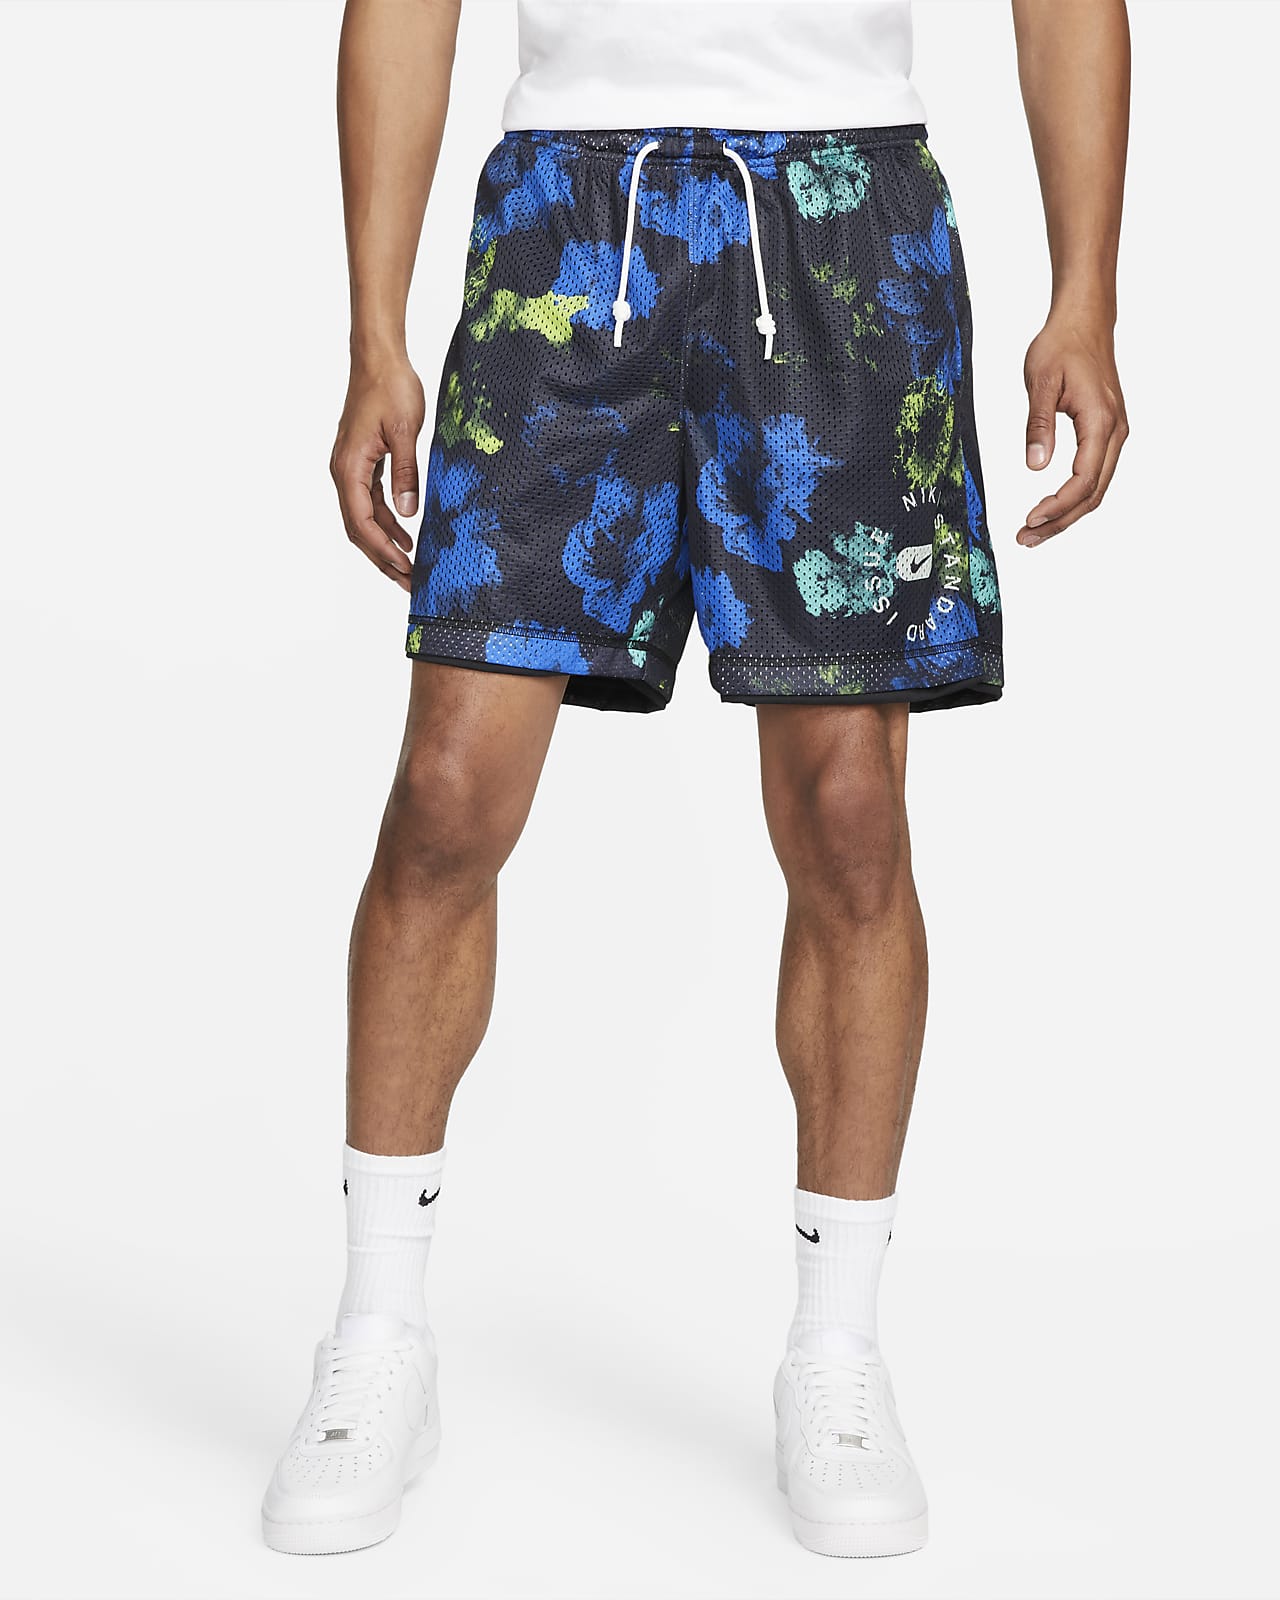 Pilfer Can withstand verb Nike Standard Issue Men's Basketball Reversible Shorts. Nike GB